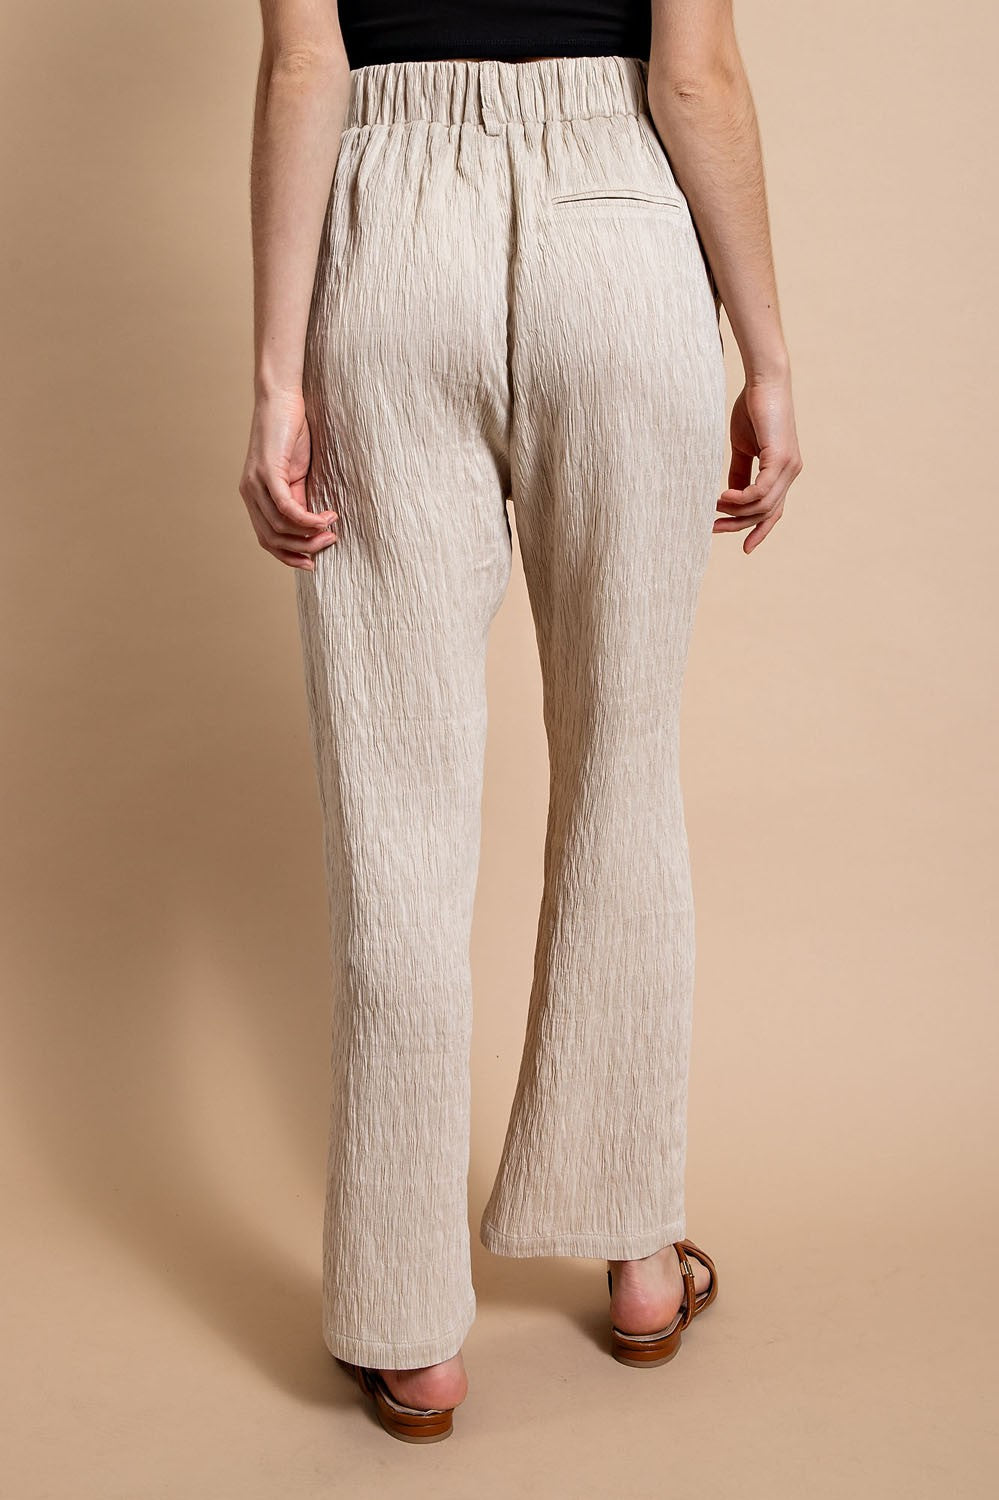 Textured Elastic Waist Pants with Side Pockets